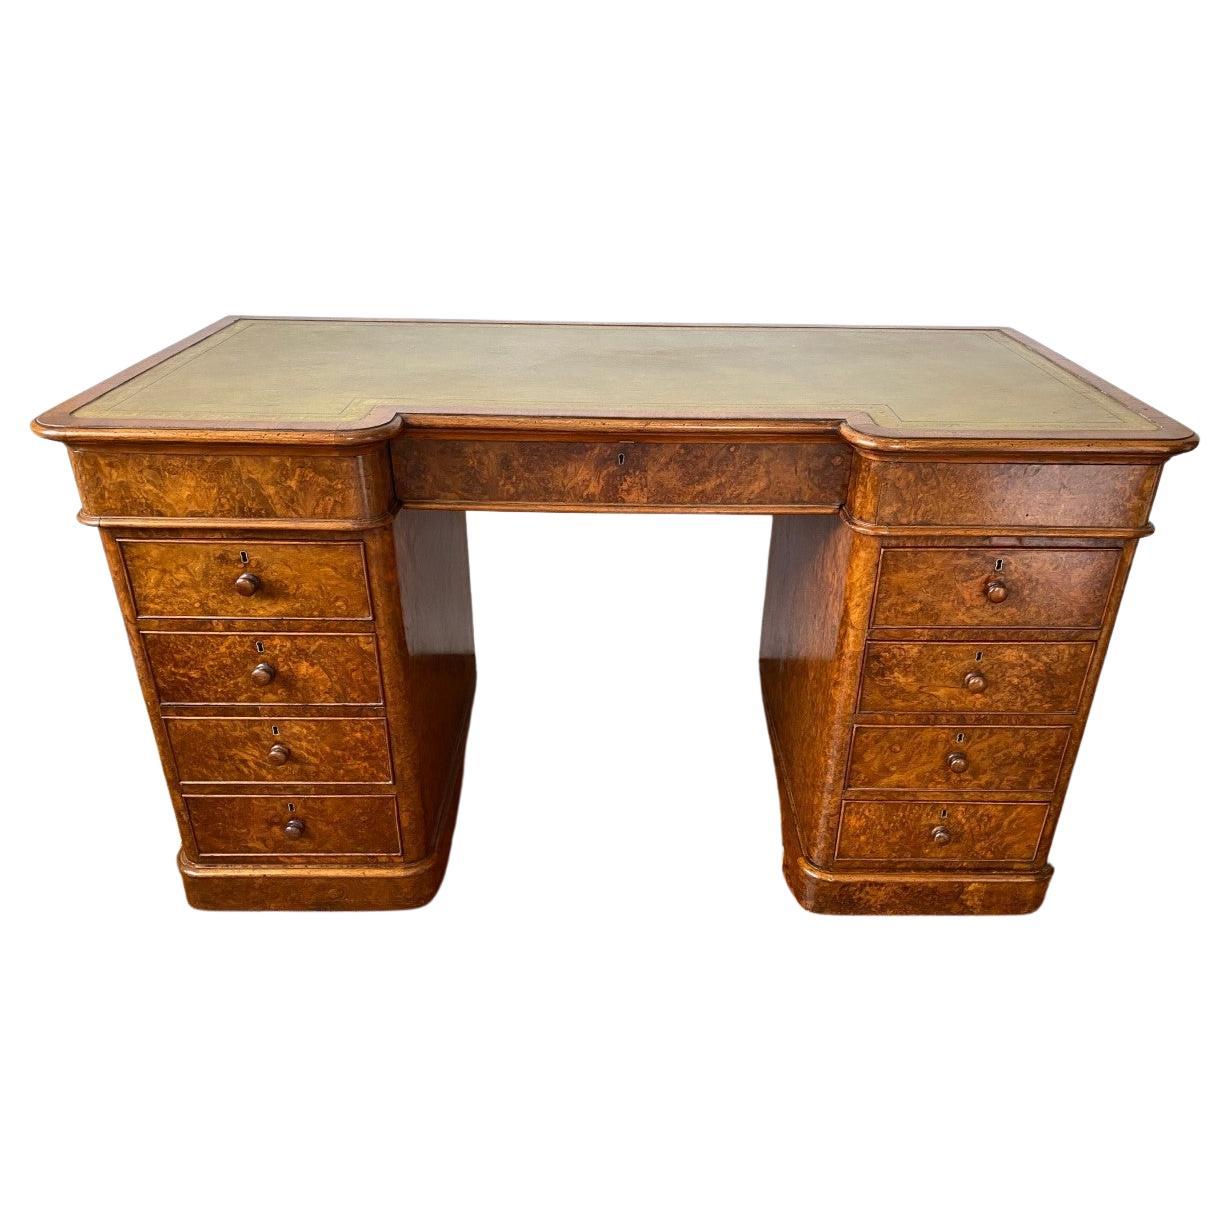 19th Century English Burr Walnut Victorian Pedestal Desk w/ Tooled Leather Top For Sale